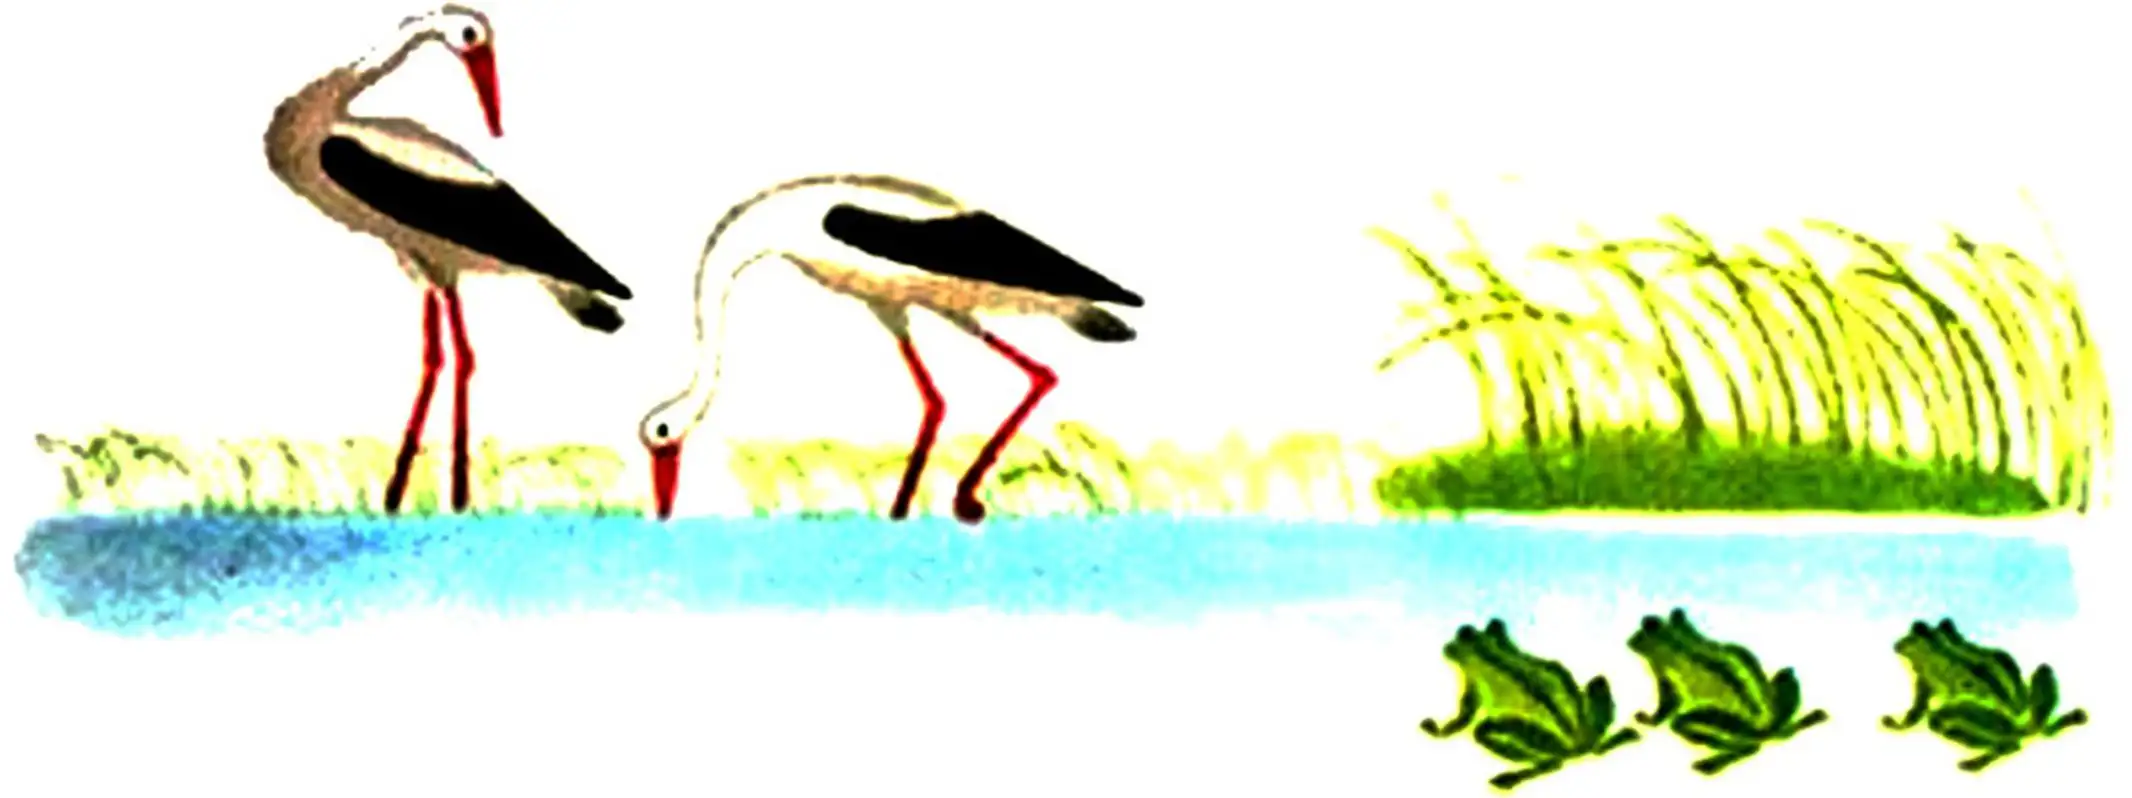 Herons and frogs